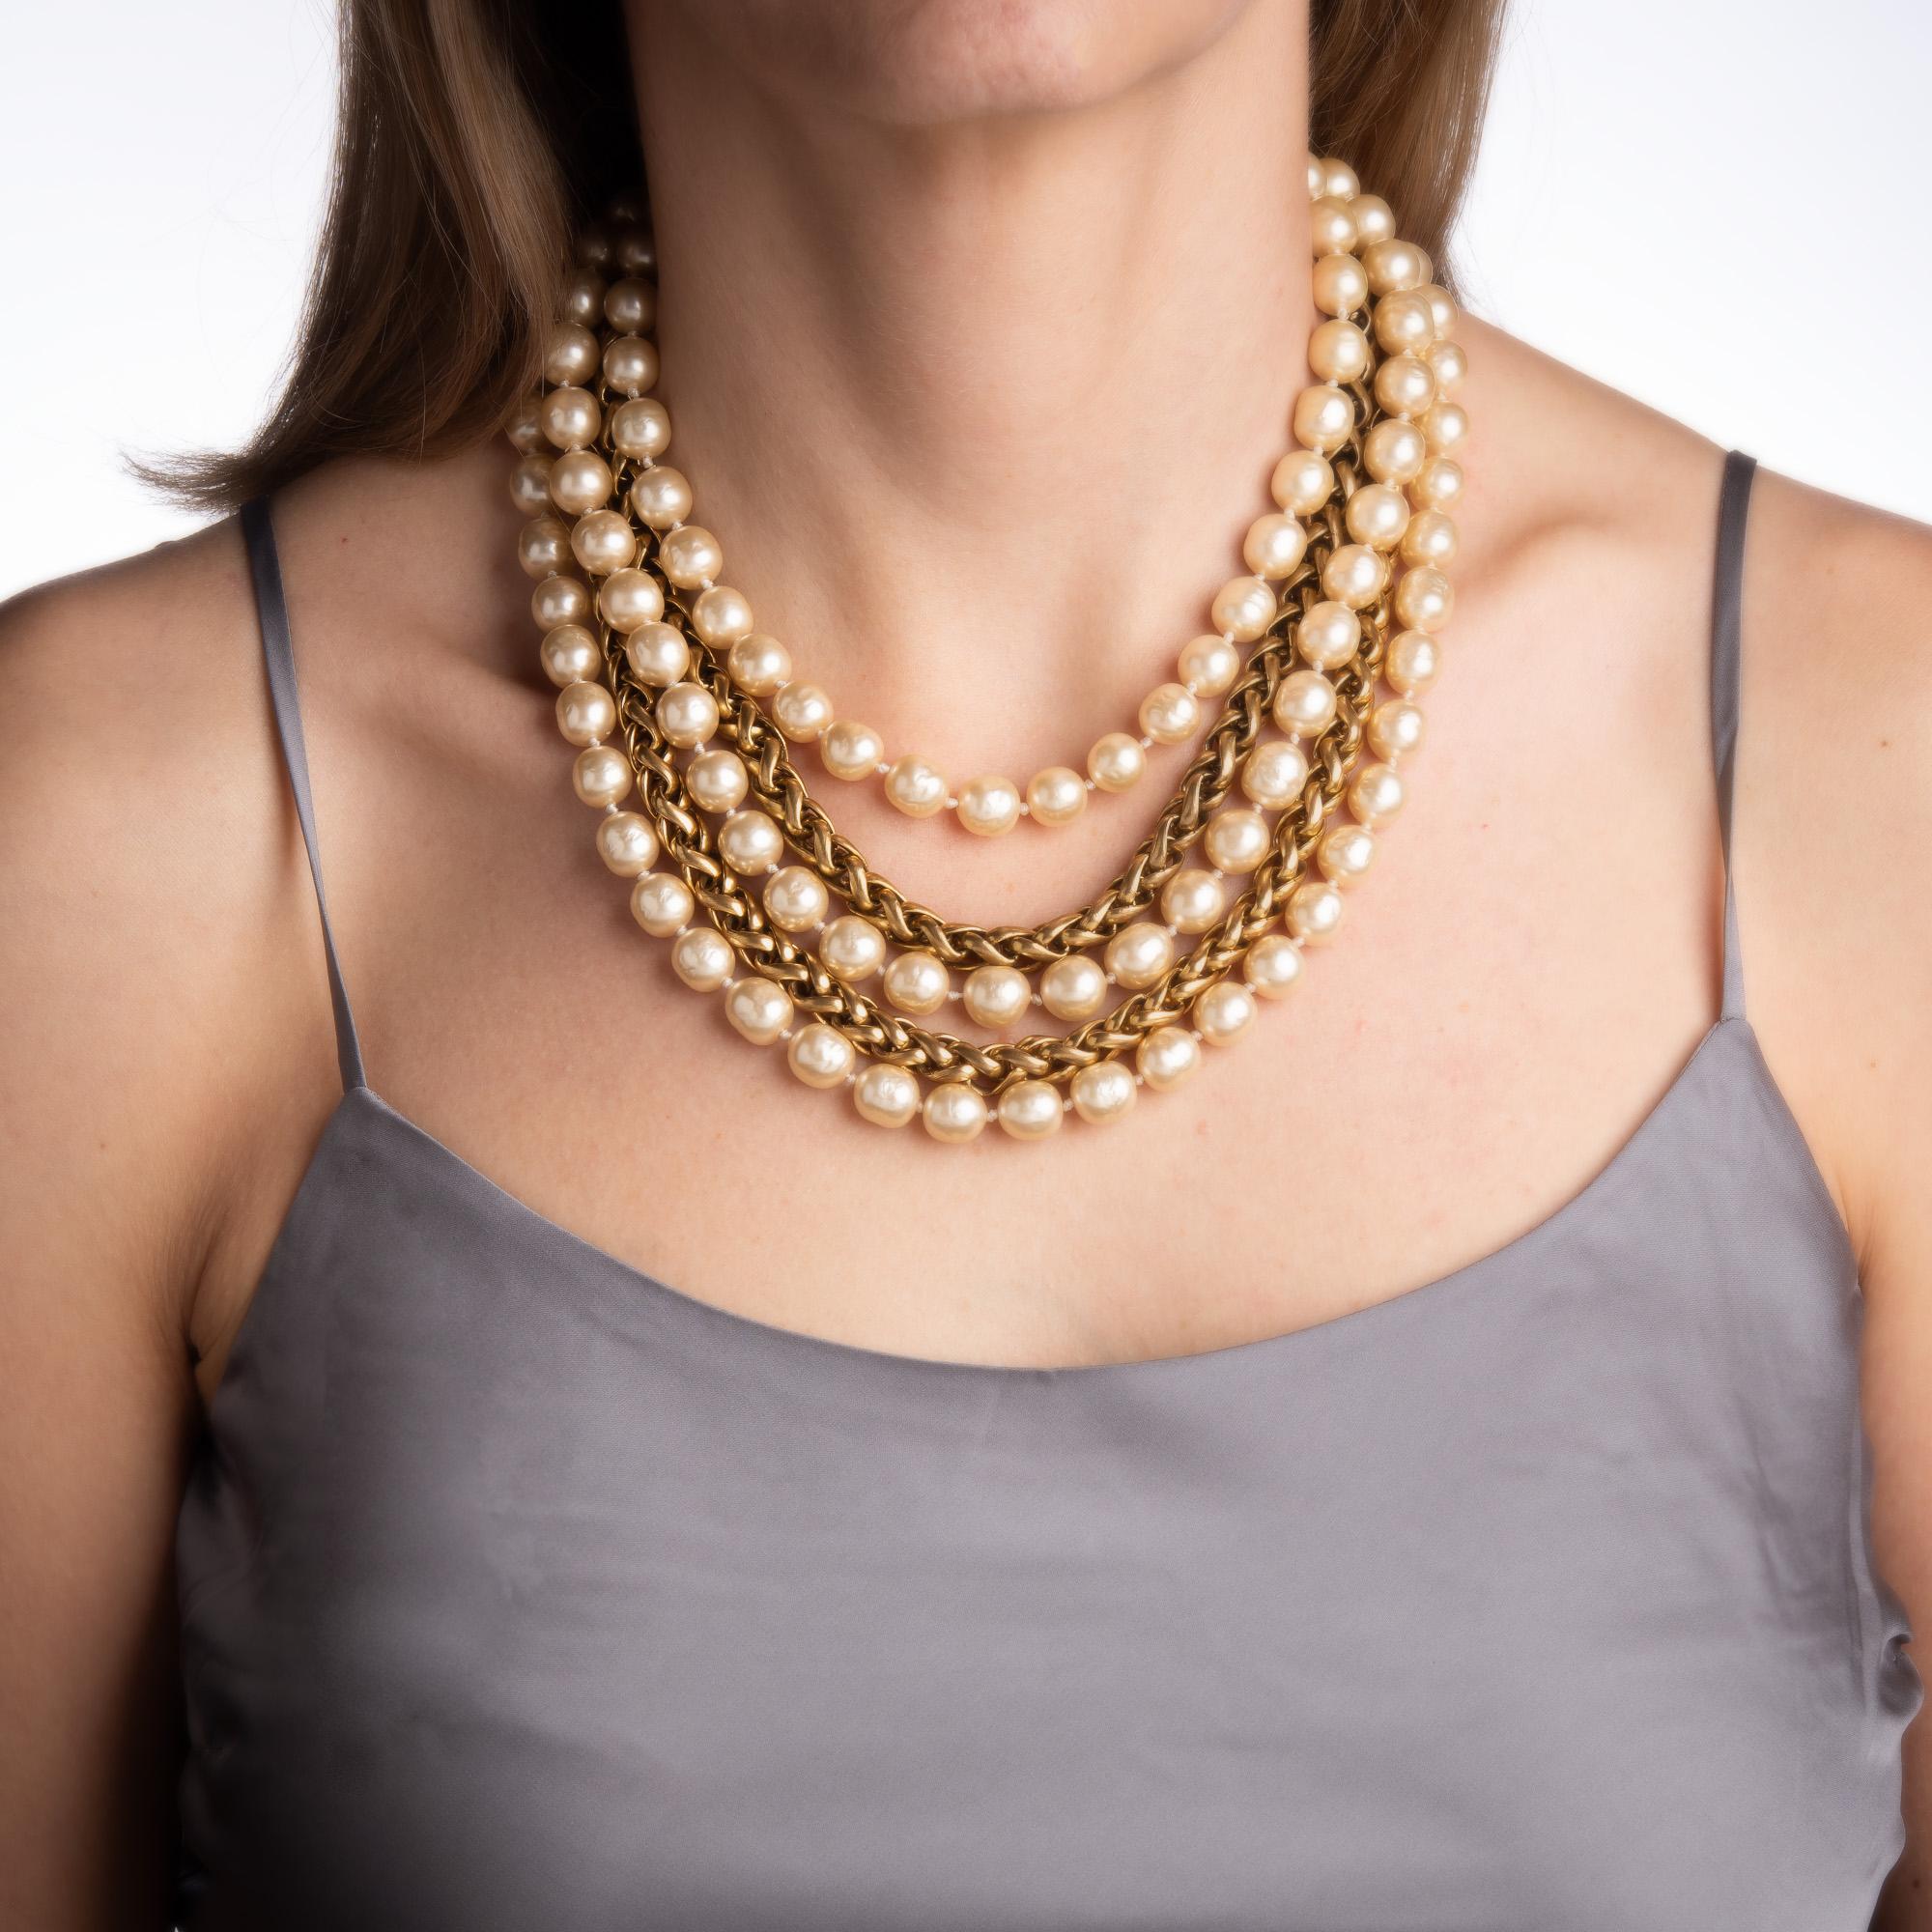 Vintage Chanel multi-strand necklace crafted in yellow gold tone (circa 1984). 

The necklace features 3 strands of 10mm faux pearls with 2 strands of yellow gold plated wheat-style chains. Measuring 17 inches in length the necklace is slightly